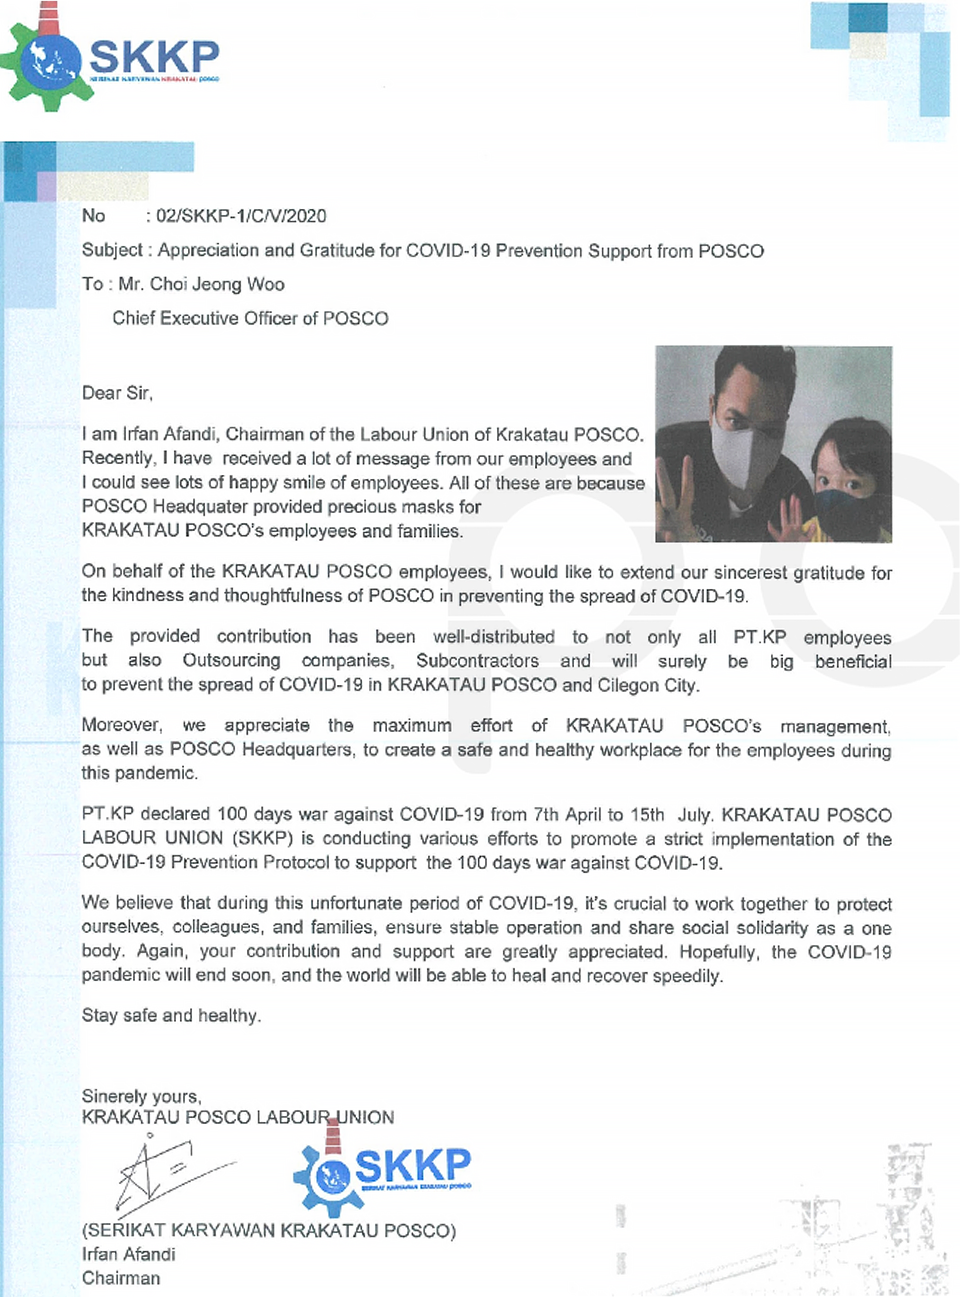 SKKP. No : 02/SKKP-1/C/V/2020. Subject: Appreciation and Gratitude for COVID-19 Prevention Support from POSCO. To . Mr. Choi Jeong Woo Chief Executive Officer of POSCO. Dear Sir. I am Irfan Afandi, Chairman of the Labour Union of Krakatau POSCO. Recently, I have received a lot of message from our employees and I could see lots of happy smile of employees. All of these are because POSCO Headquater provided precious masks for KRAKATAU POSCO's employees and families. On behalf of the KRAKATAU POSCO employees, I would like to extend our sincerest gratitude for the kindness and thoughtfulness of POSCO in preventing the spread of COVID-19. The provided contribution has been well-distributed to not only all PT.KP employees but also Outsourcing companies, Subcontractors and will surely be big beneficial to prevent the spread of COVID-19 in KRAKATAU POSCO and Cilegon City. Moreover, we appreciate the maximum effort of KRAKATAU POSCO's management, as well as POSCO Headquarters, to creat a safe and healthy workplace for the employees during this pandemic. PT.KP declared 100 days war against COVID-19 from 7th April to 15th July. KRAKATAU POSCO LABOUR UNION (SKKP) is conducting various efforts to promote a strict implementation of the COVID-19 Prevention Protocol to support the 100 days war against COVID-19. We believe that during this unfortunate period of COVID-19, it’s crucial to work together to protect ourselves, colleagues, and families, ensure stable operation and share social solidarity as a one body. Again, your contribution and support are greatly appreciated. Hopefully, the COVID-19 pandemic will end soon, and the world will be able to heal and recover speedily. Stay safe and healthy. Sinerely yours, KRAKATAU POSCO LABOUR UNION (SERIKAT KARYAWAN KRAKATAU POSCO) Irfan Afandi Chairman